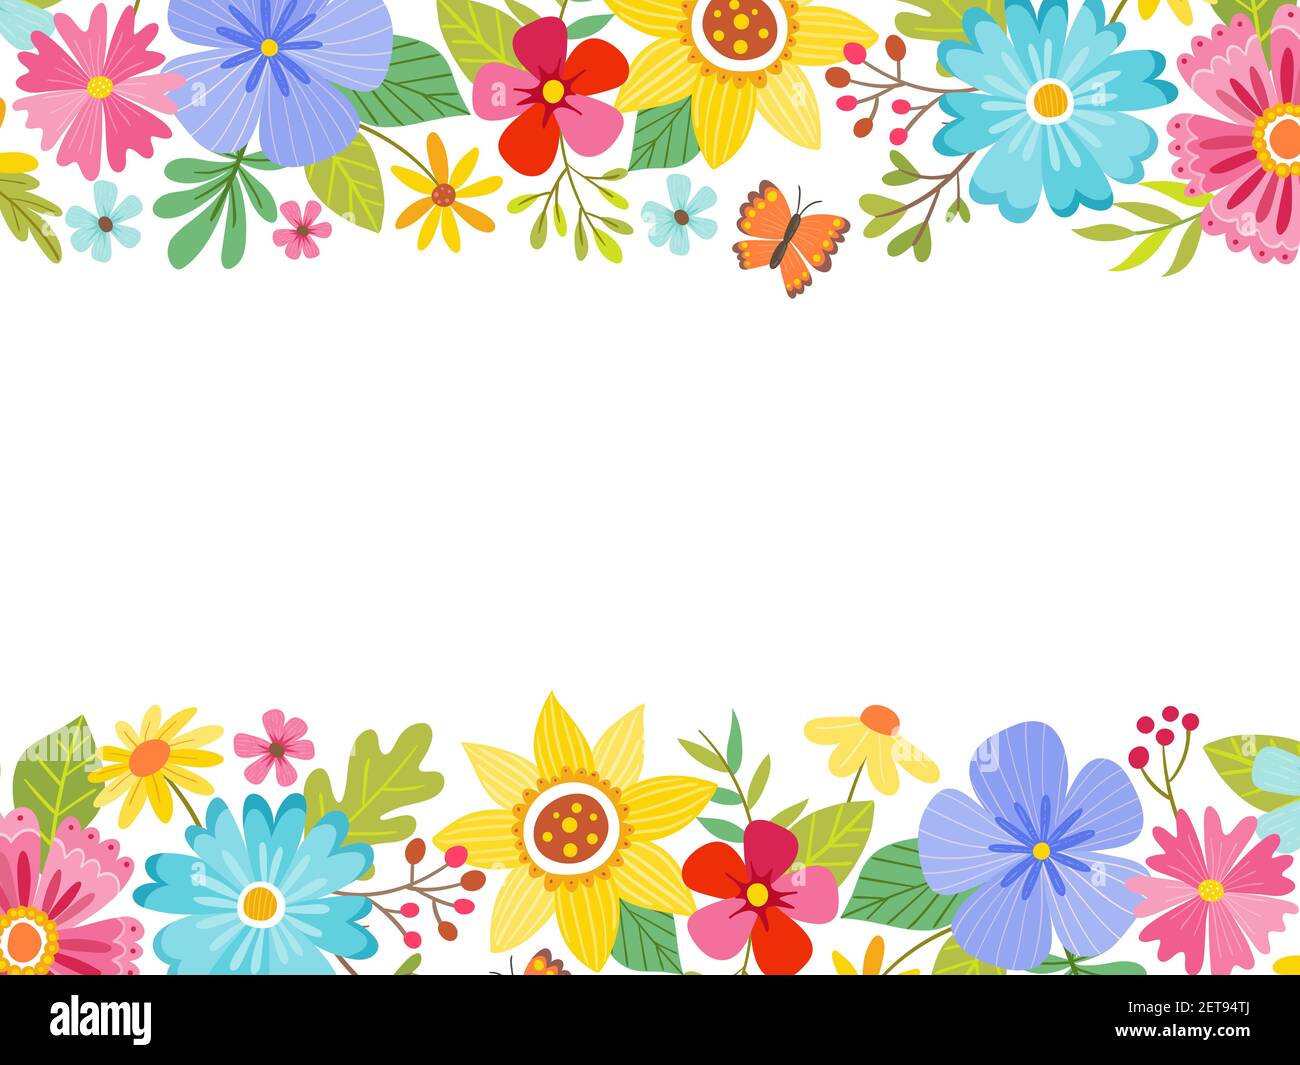 Spring landscape background full of flowers at the top and bottom, with an editable blank space in the middle. Vector illustration. Stock Vector